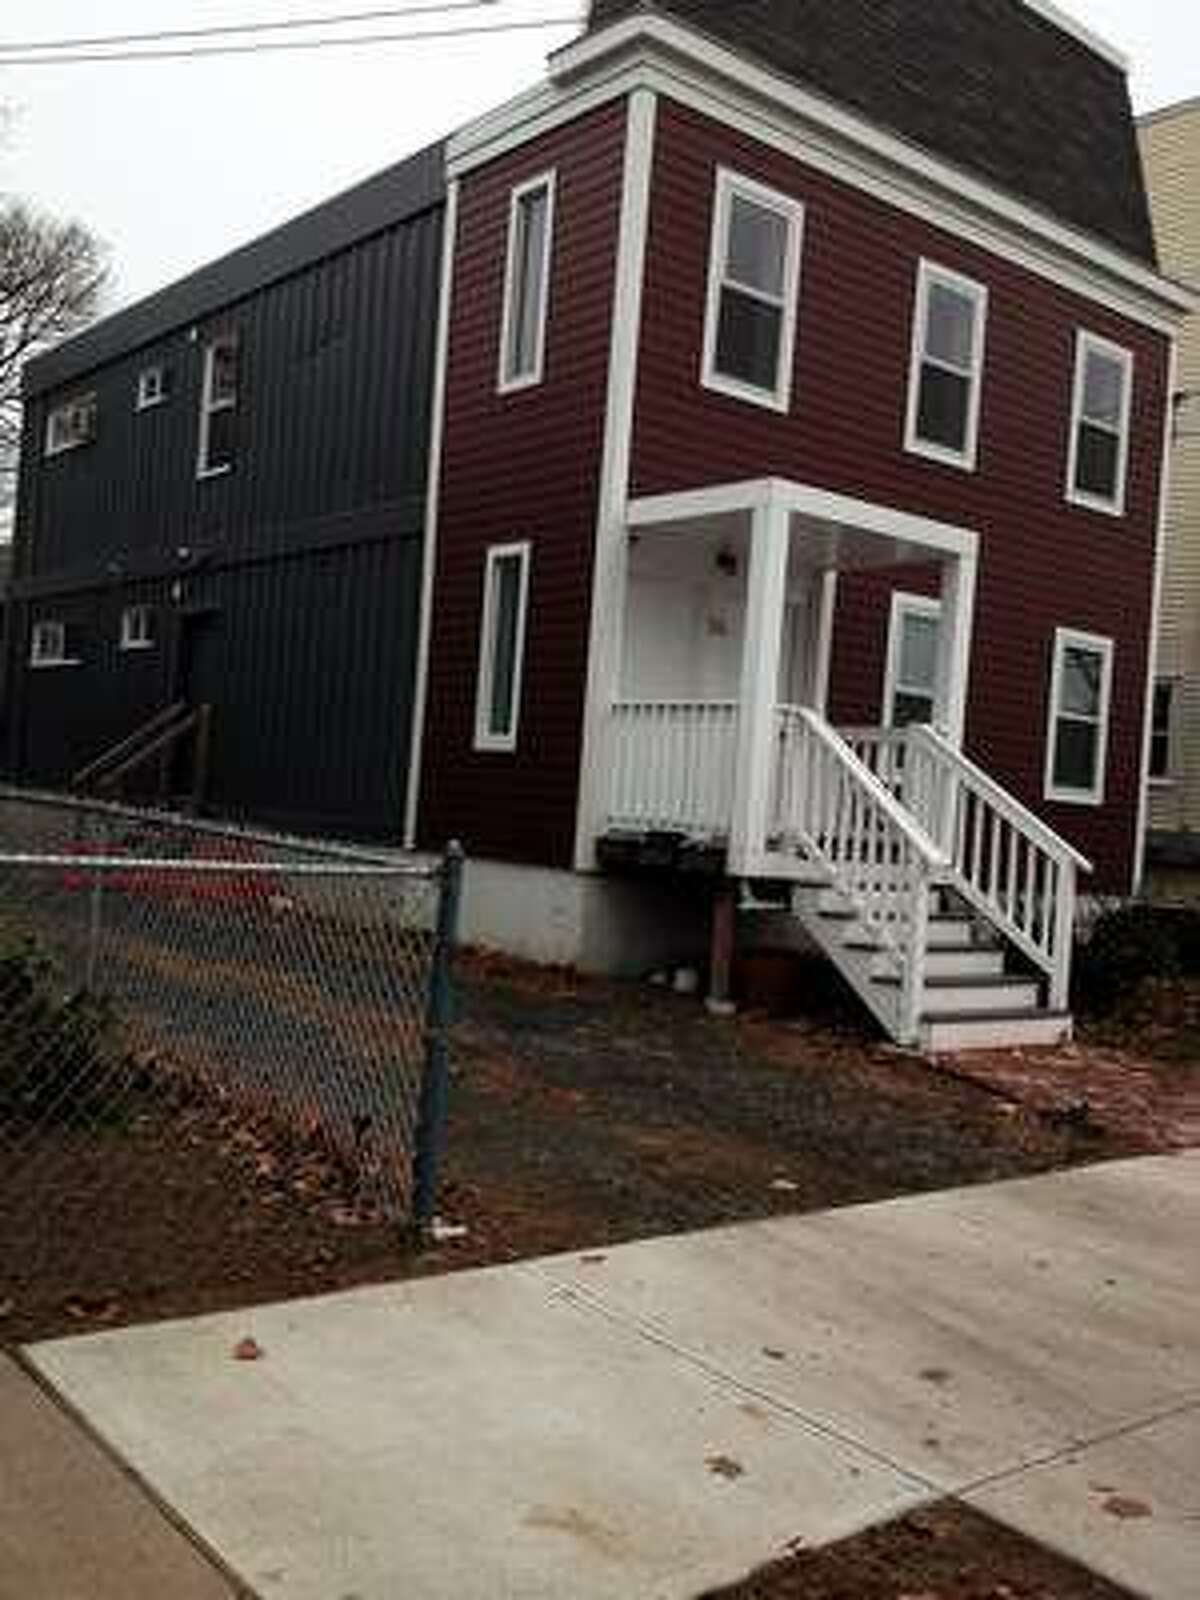 Christian Salvati's container house at 56 Vernon St. in New Haven.